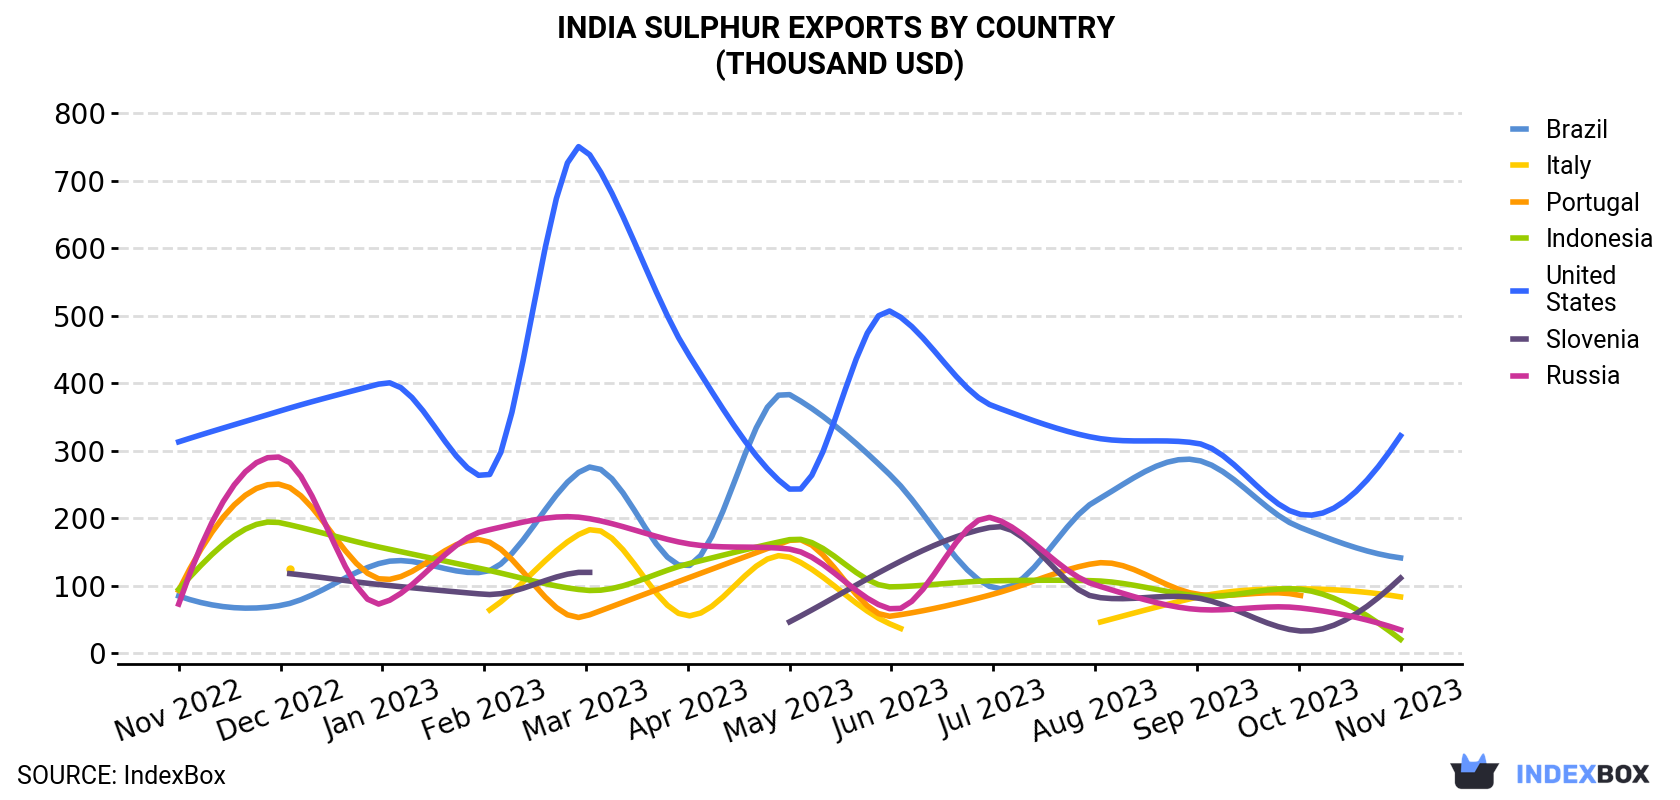 India Sulphur Exports By Country (Thousand USD)